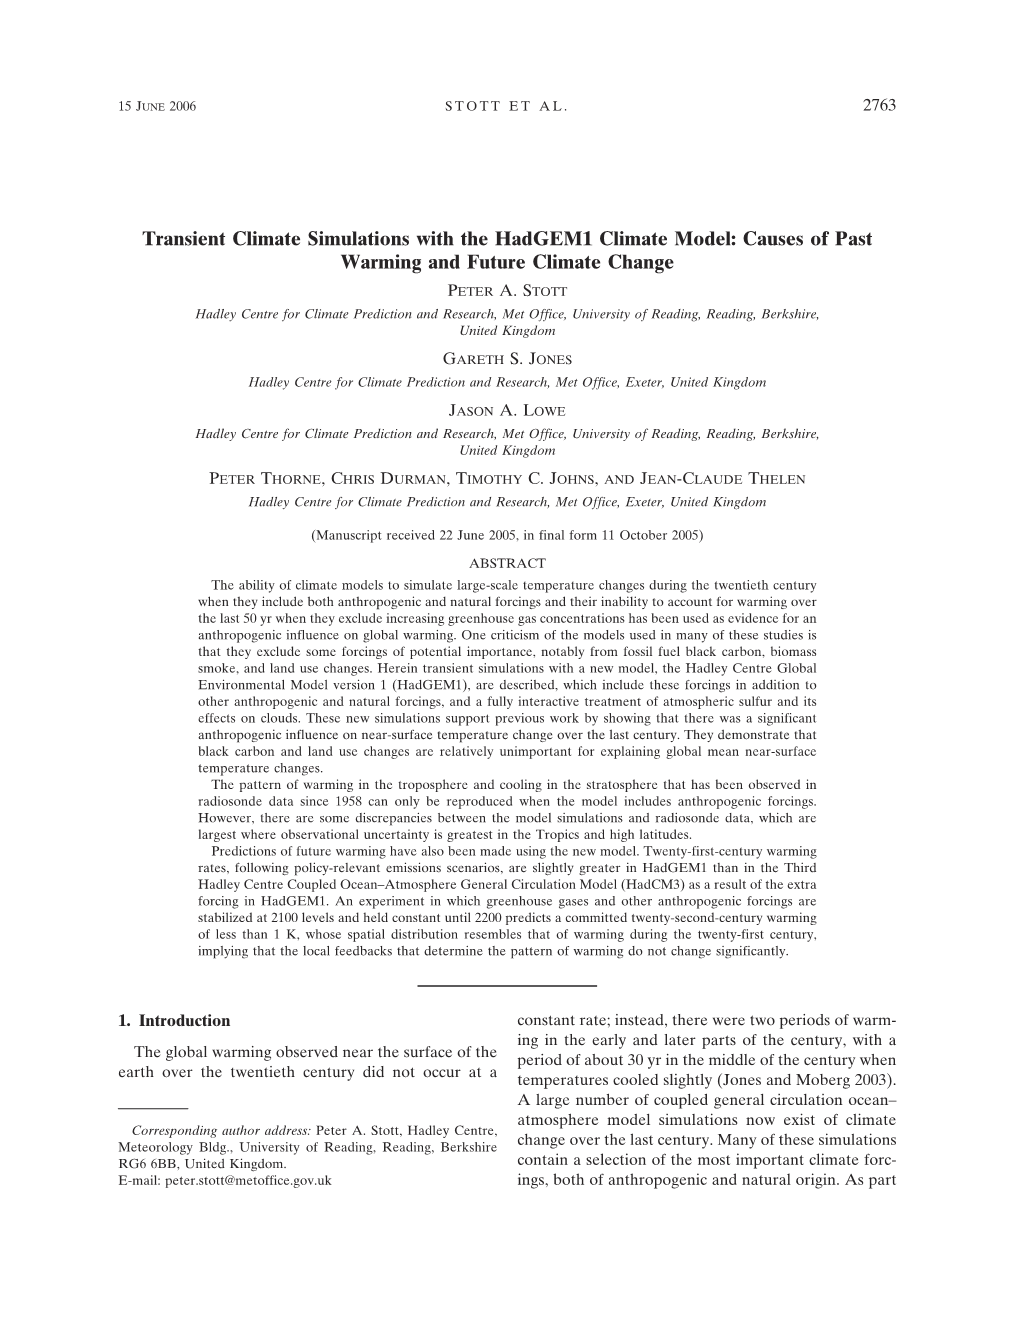 Transient Climate Simulations with the Hadgem1 Climate Model: Causes of Past Warming and Future Climate Change PETER A